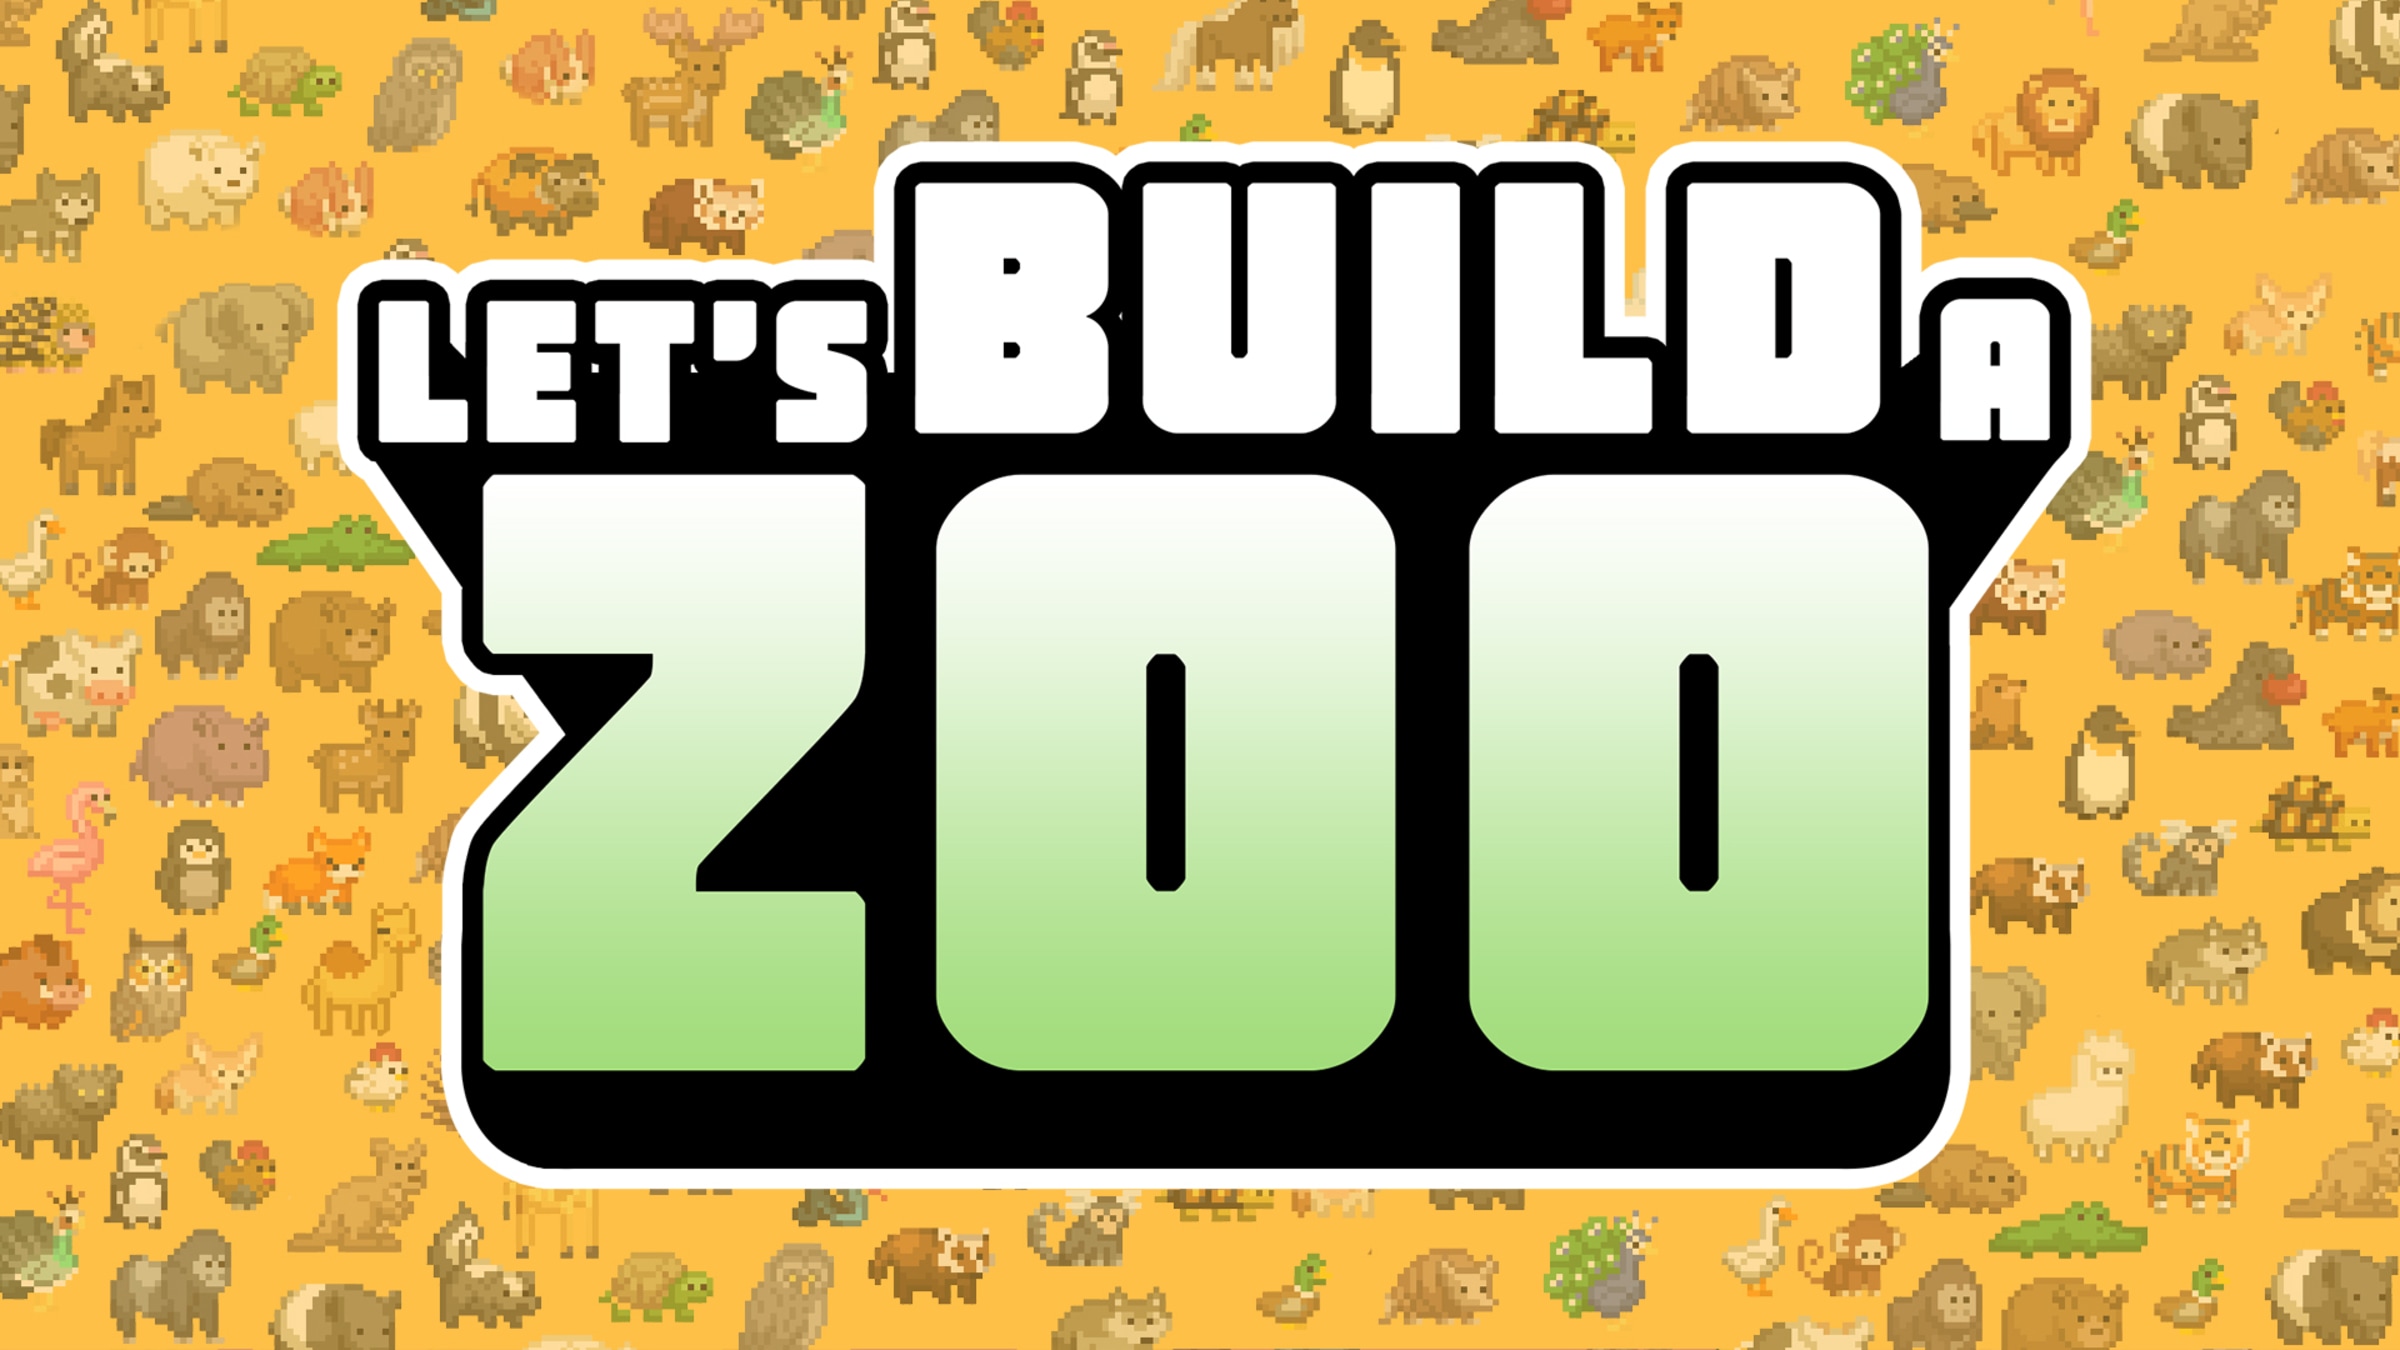 Let's Build a Zoo for Nintendo Switch - Nintendo Official Site